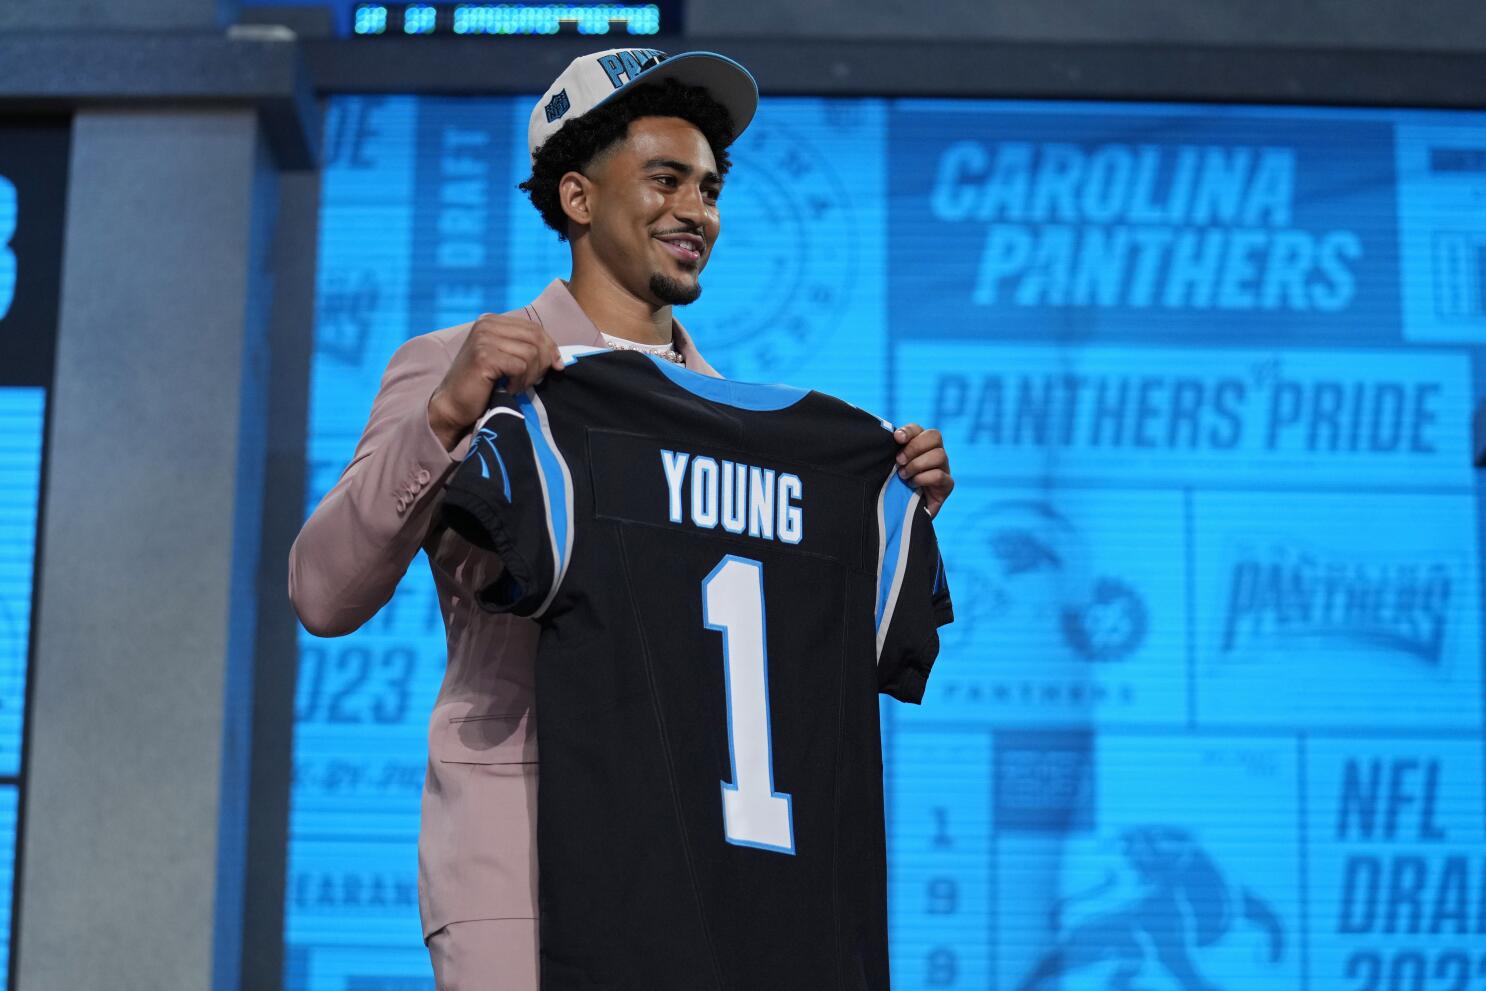 NFL Draft 2022 Round 1 recap: Relive the top storylines, trades and picks  from Day 1 